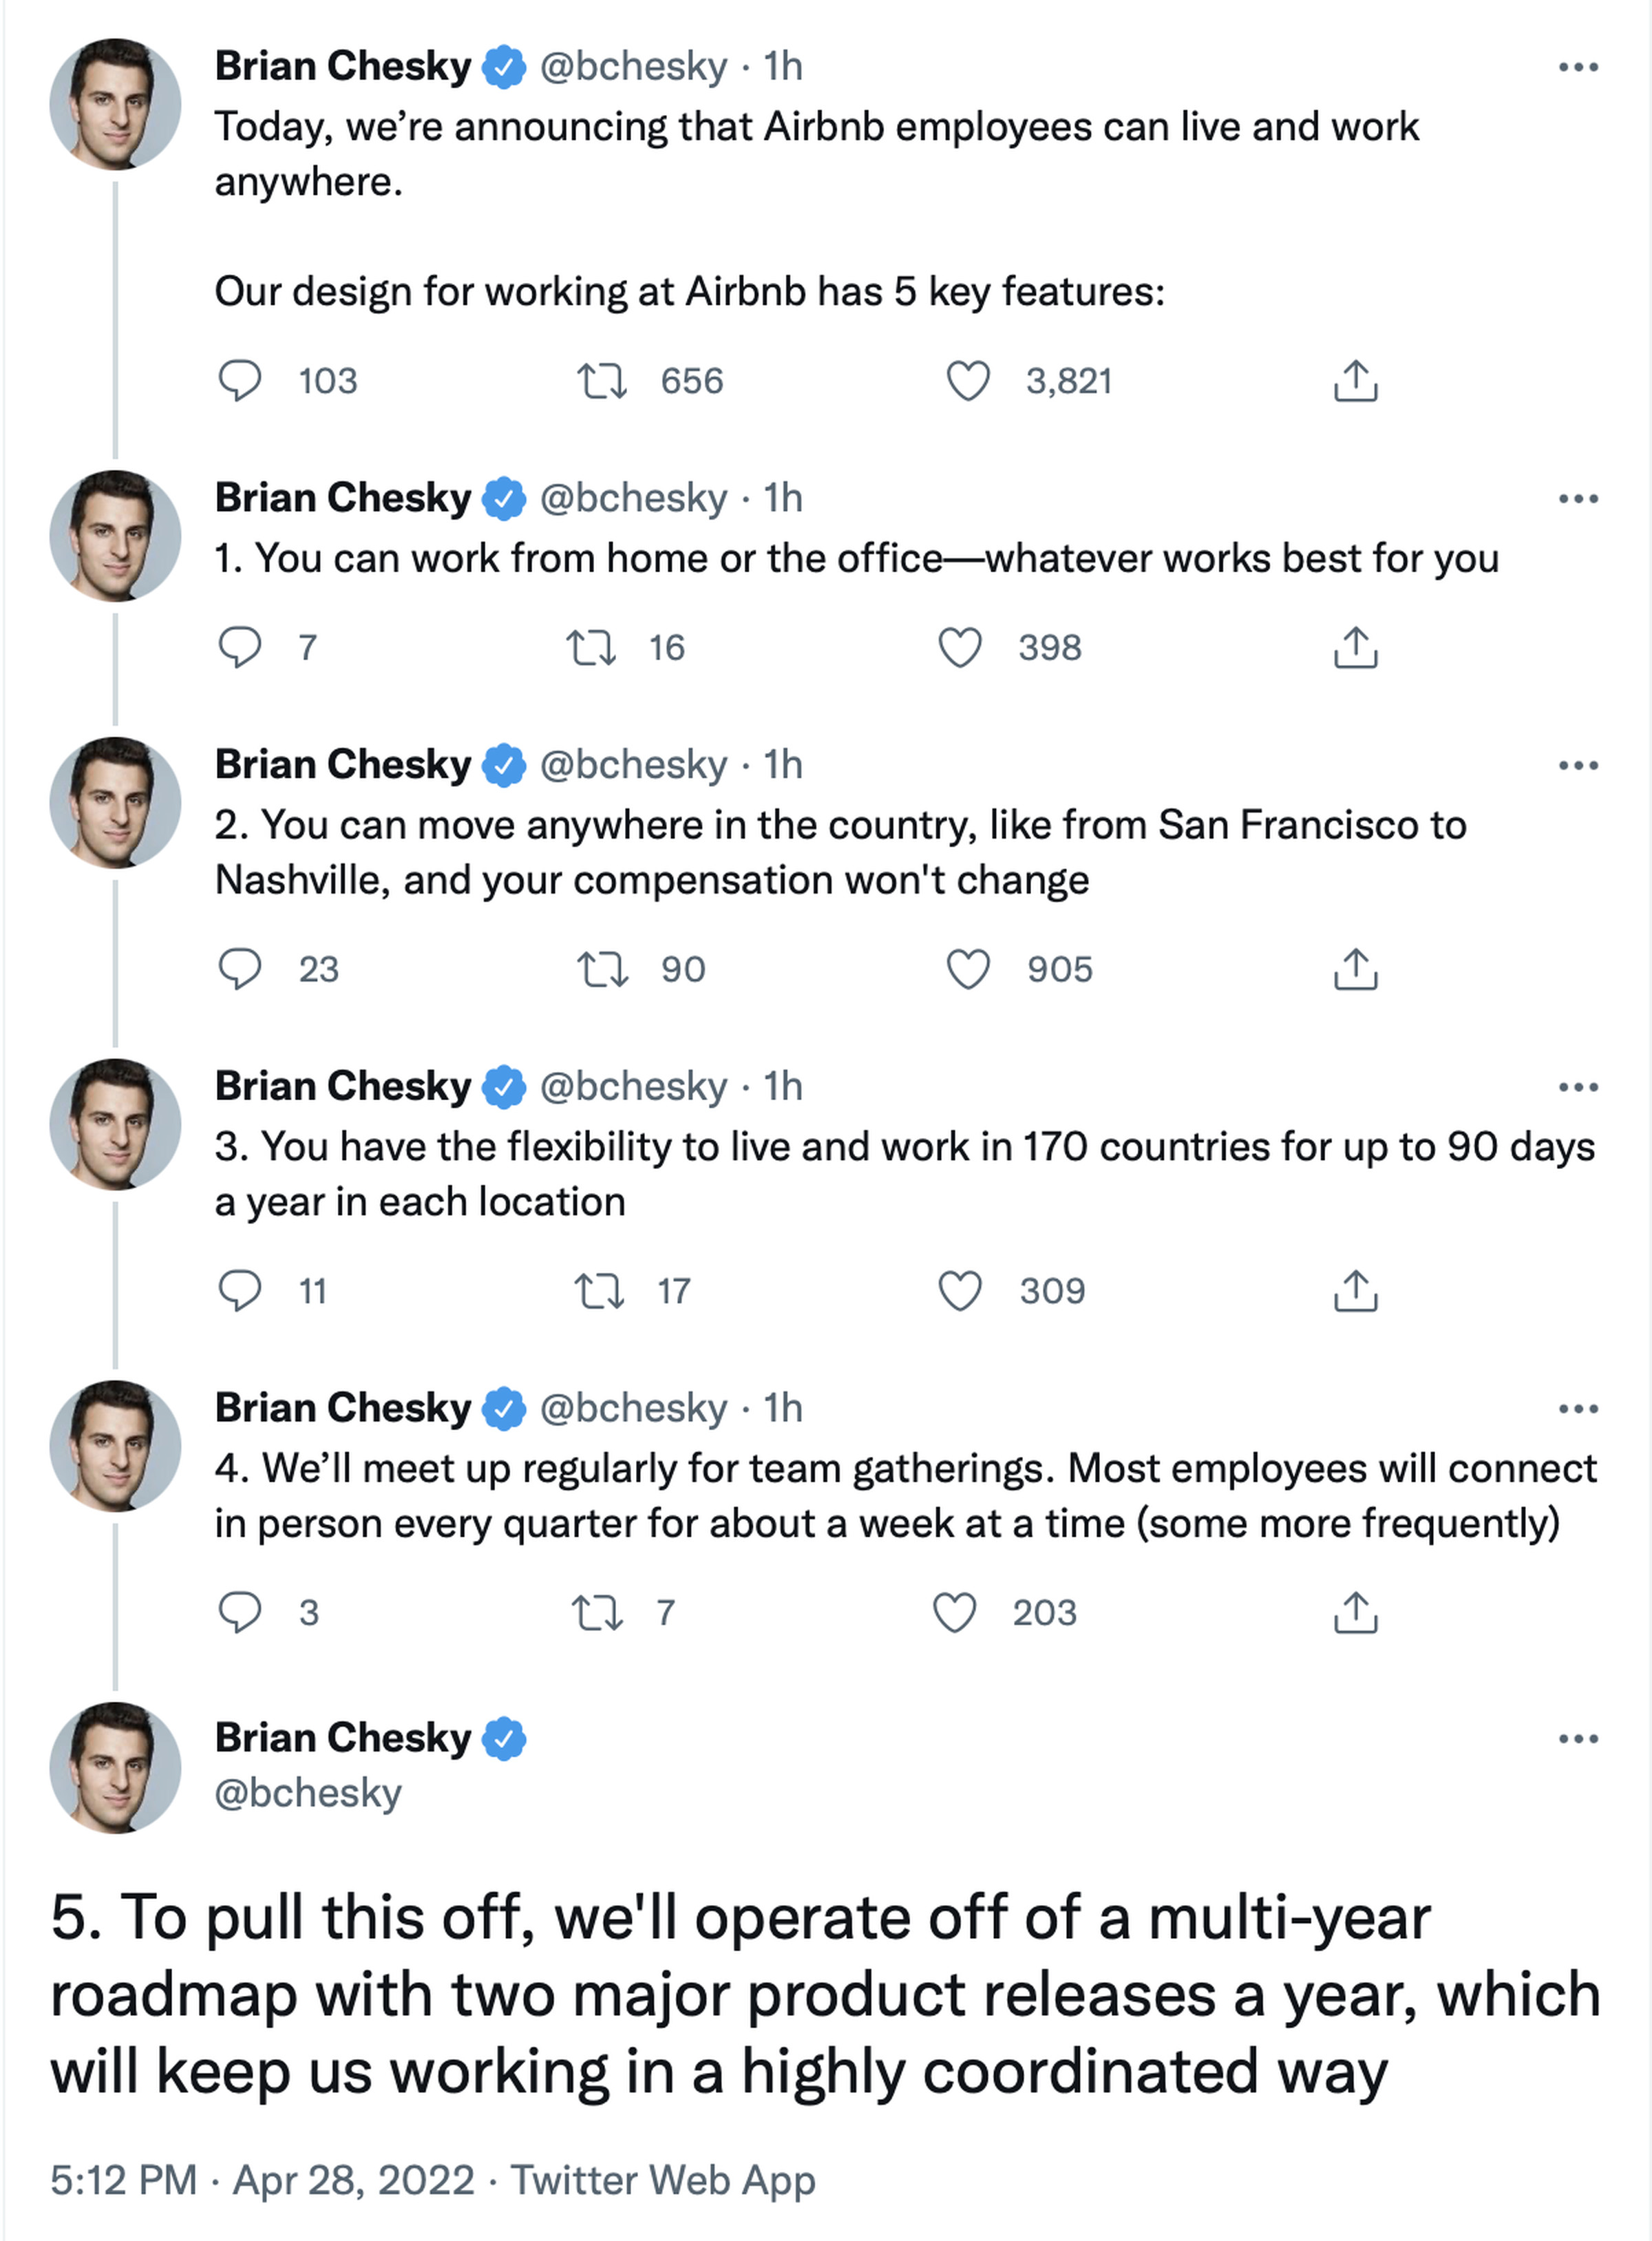 Part of Chesky’s thread announcing Airbnb’s new work policy.